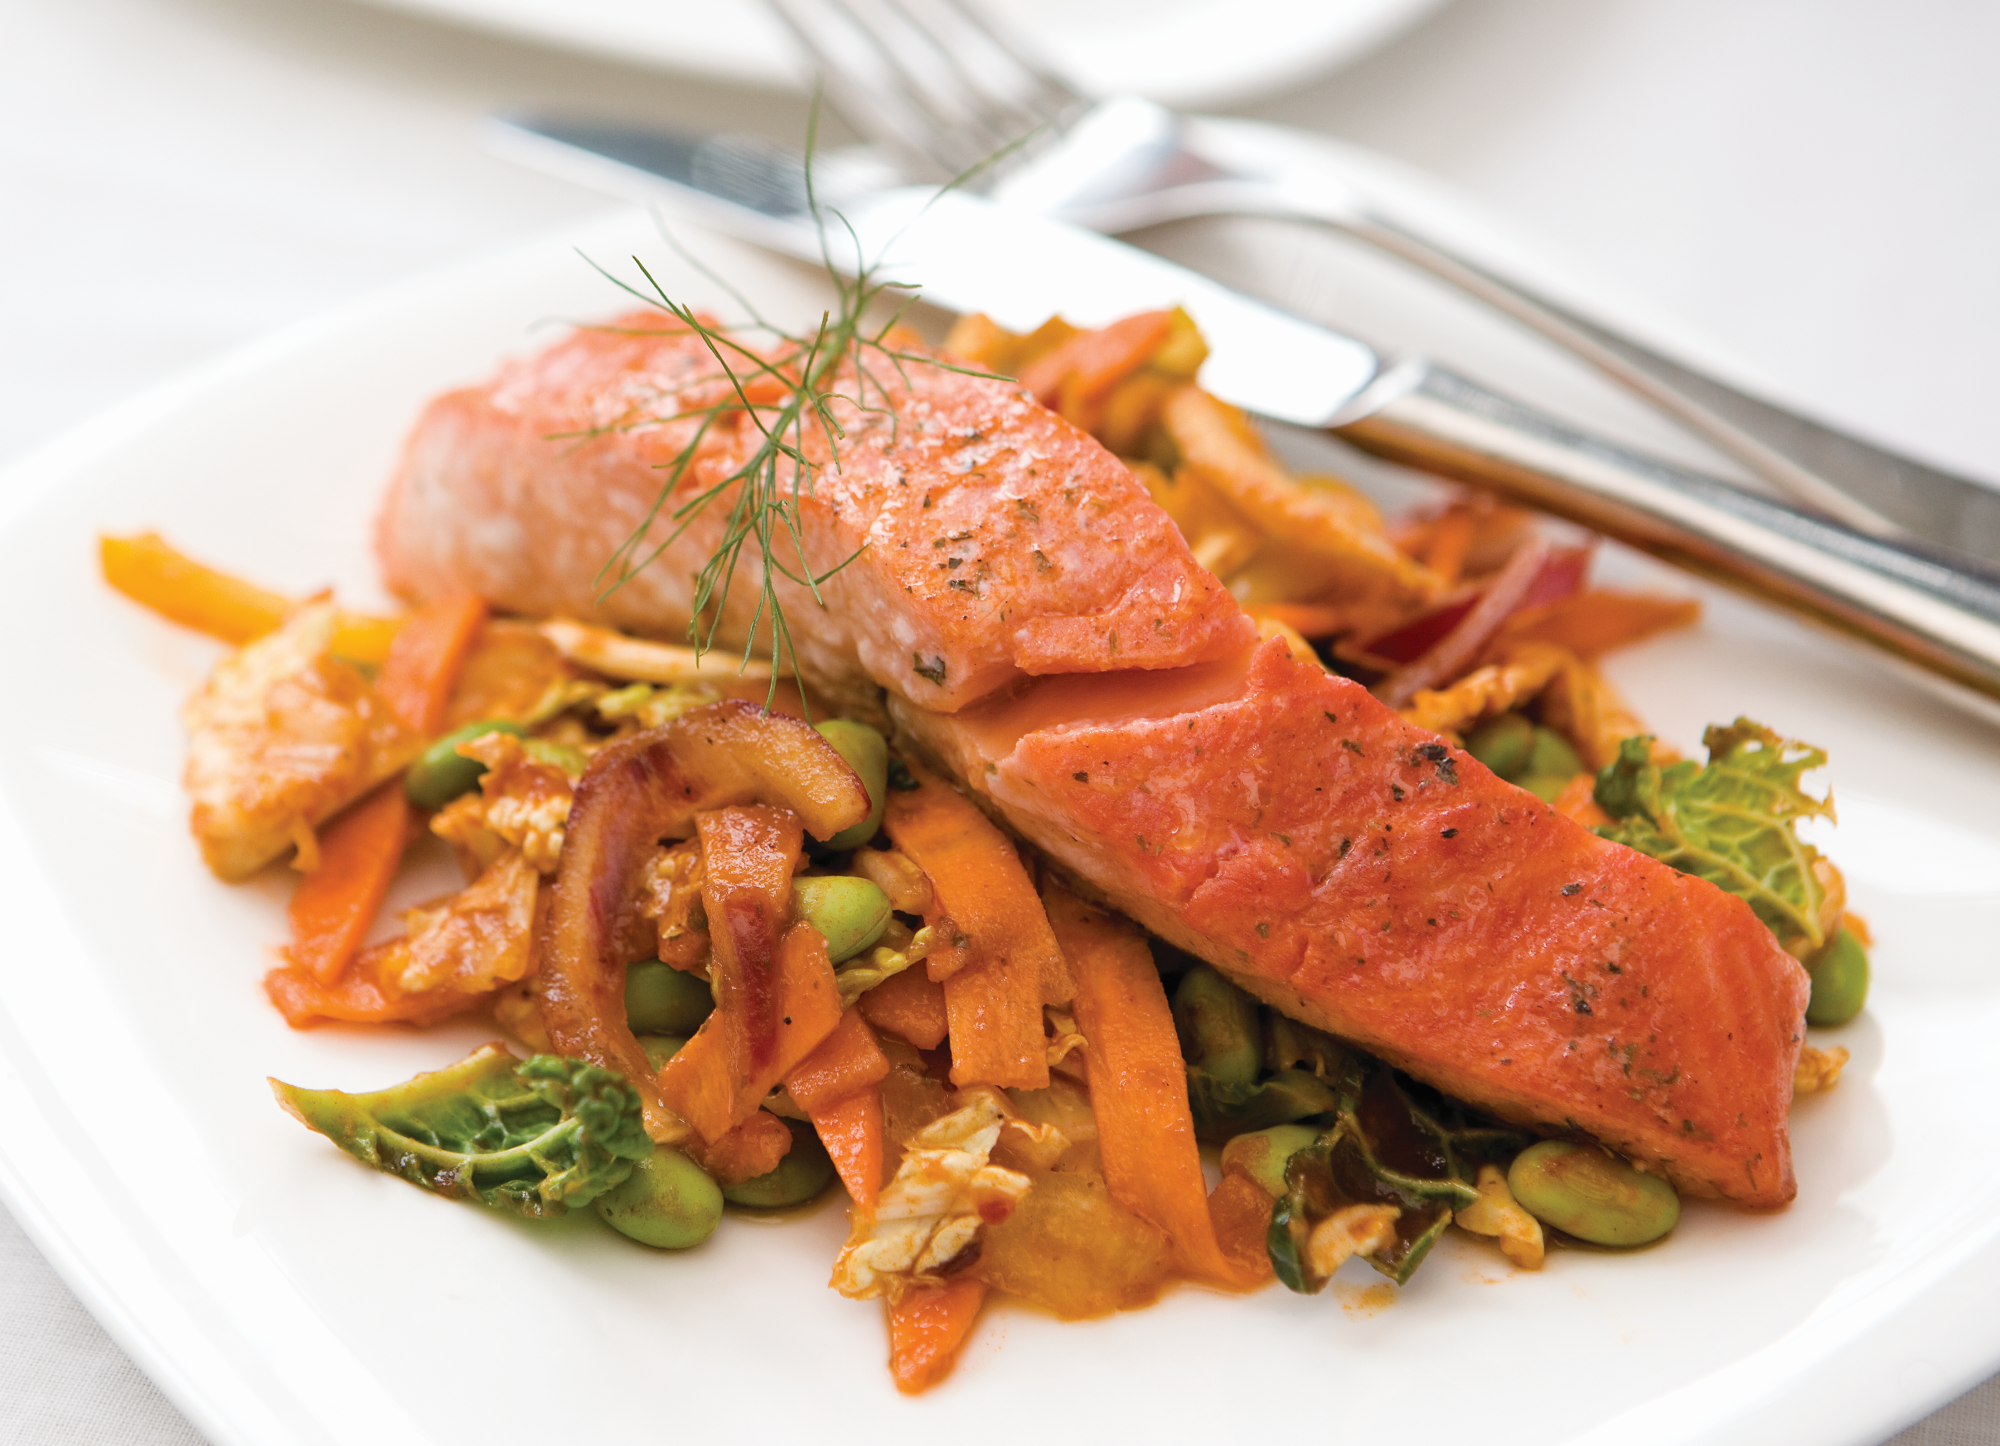 Tandoori Salmon with Spicy Noodles is a fillet of salmon dusted with curry powder and baked, resting on a bed of stir-fired noodle and vegetables